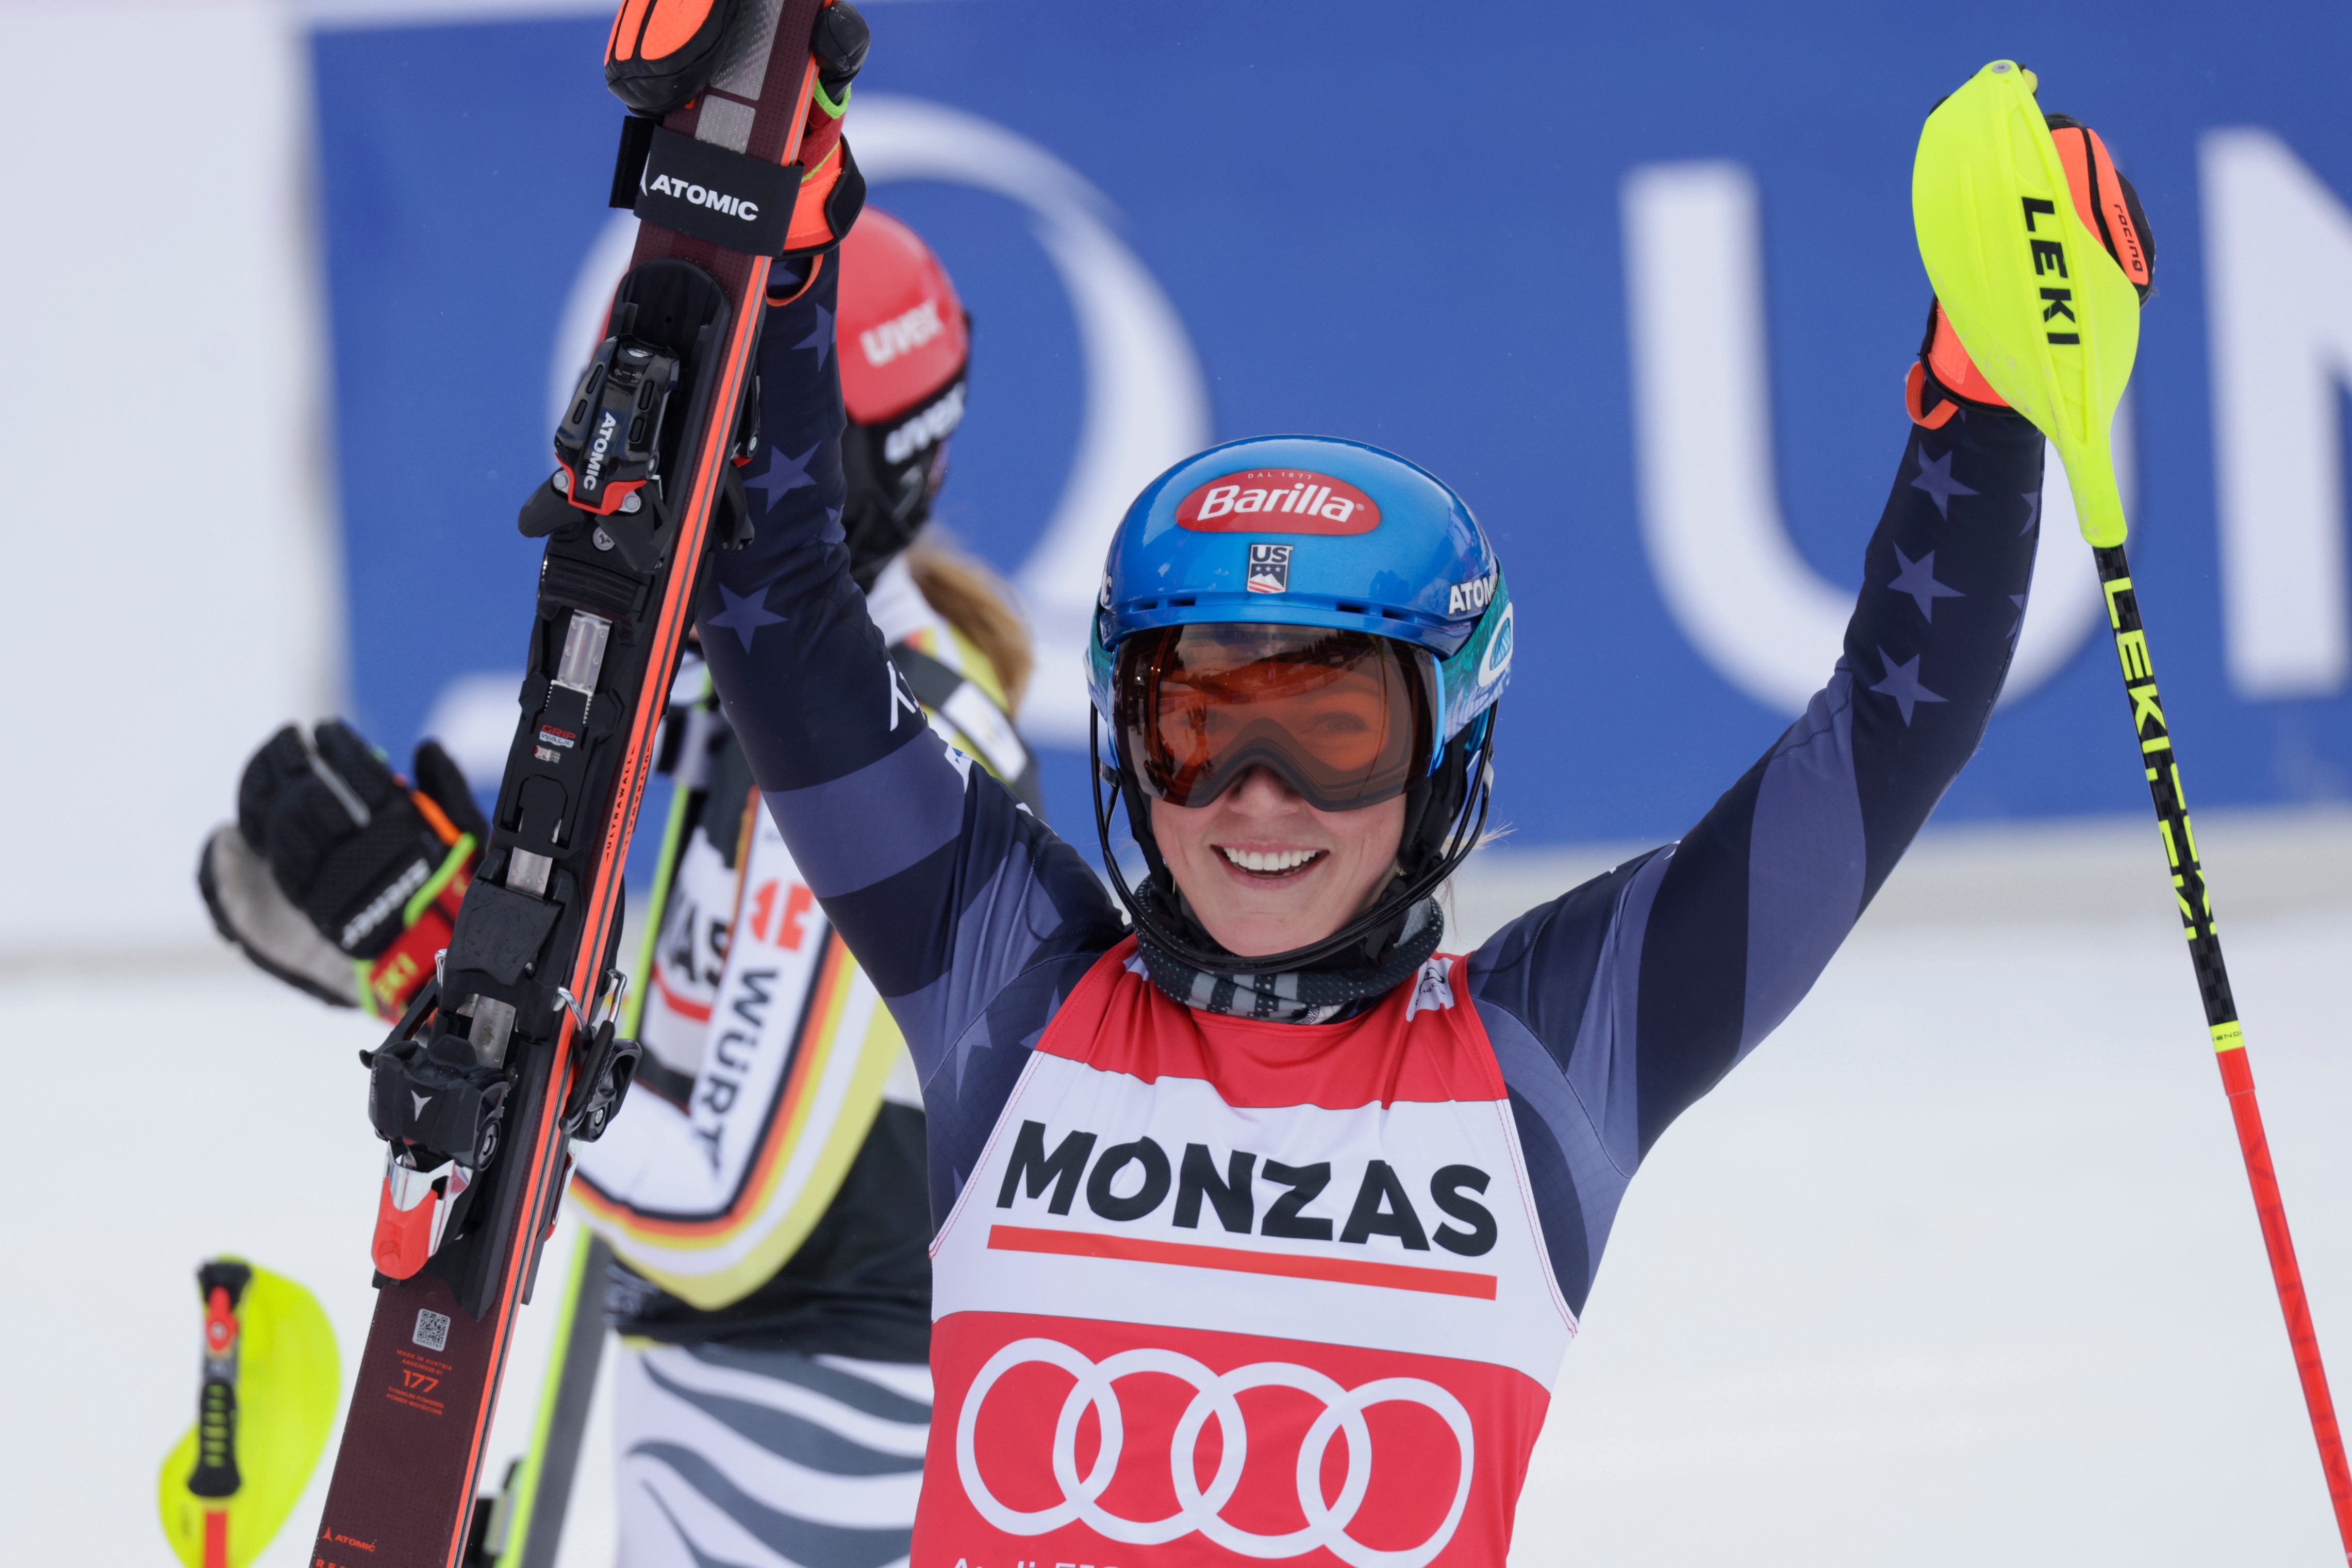 Mikaela Shiffrin gets 85th World Cup victory, pulling within one of Ingemar Stenmark